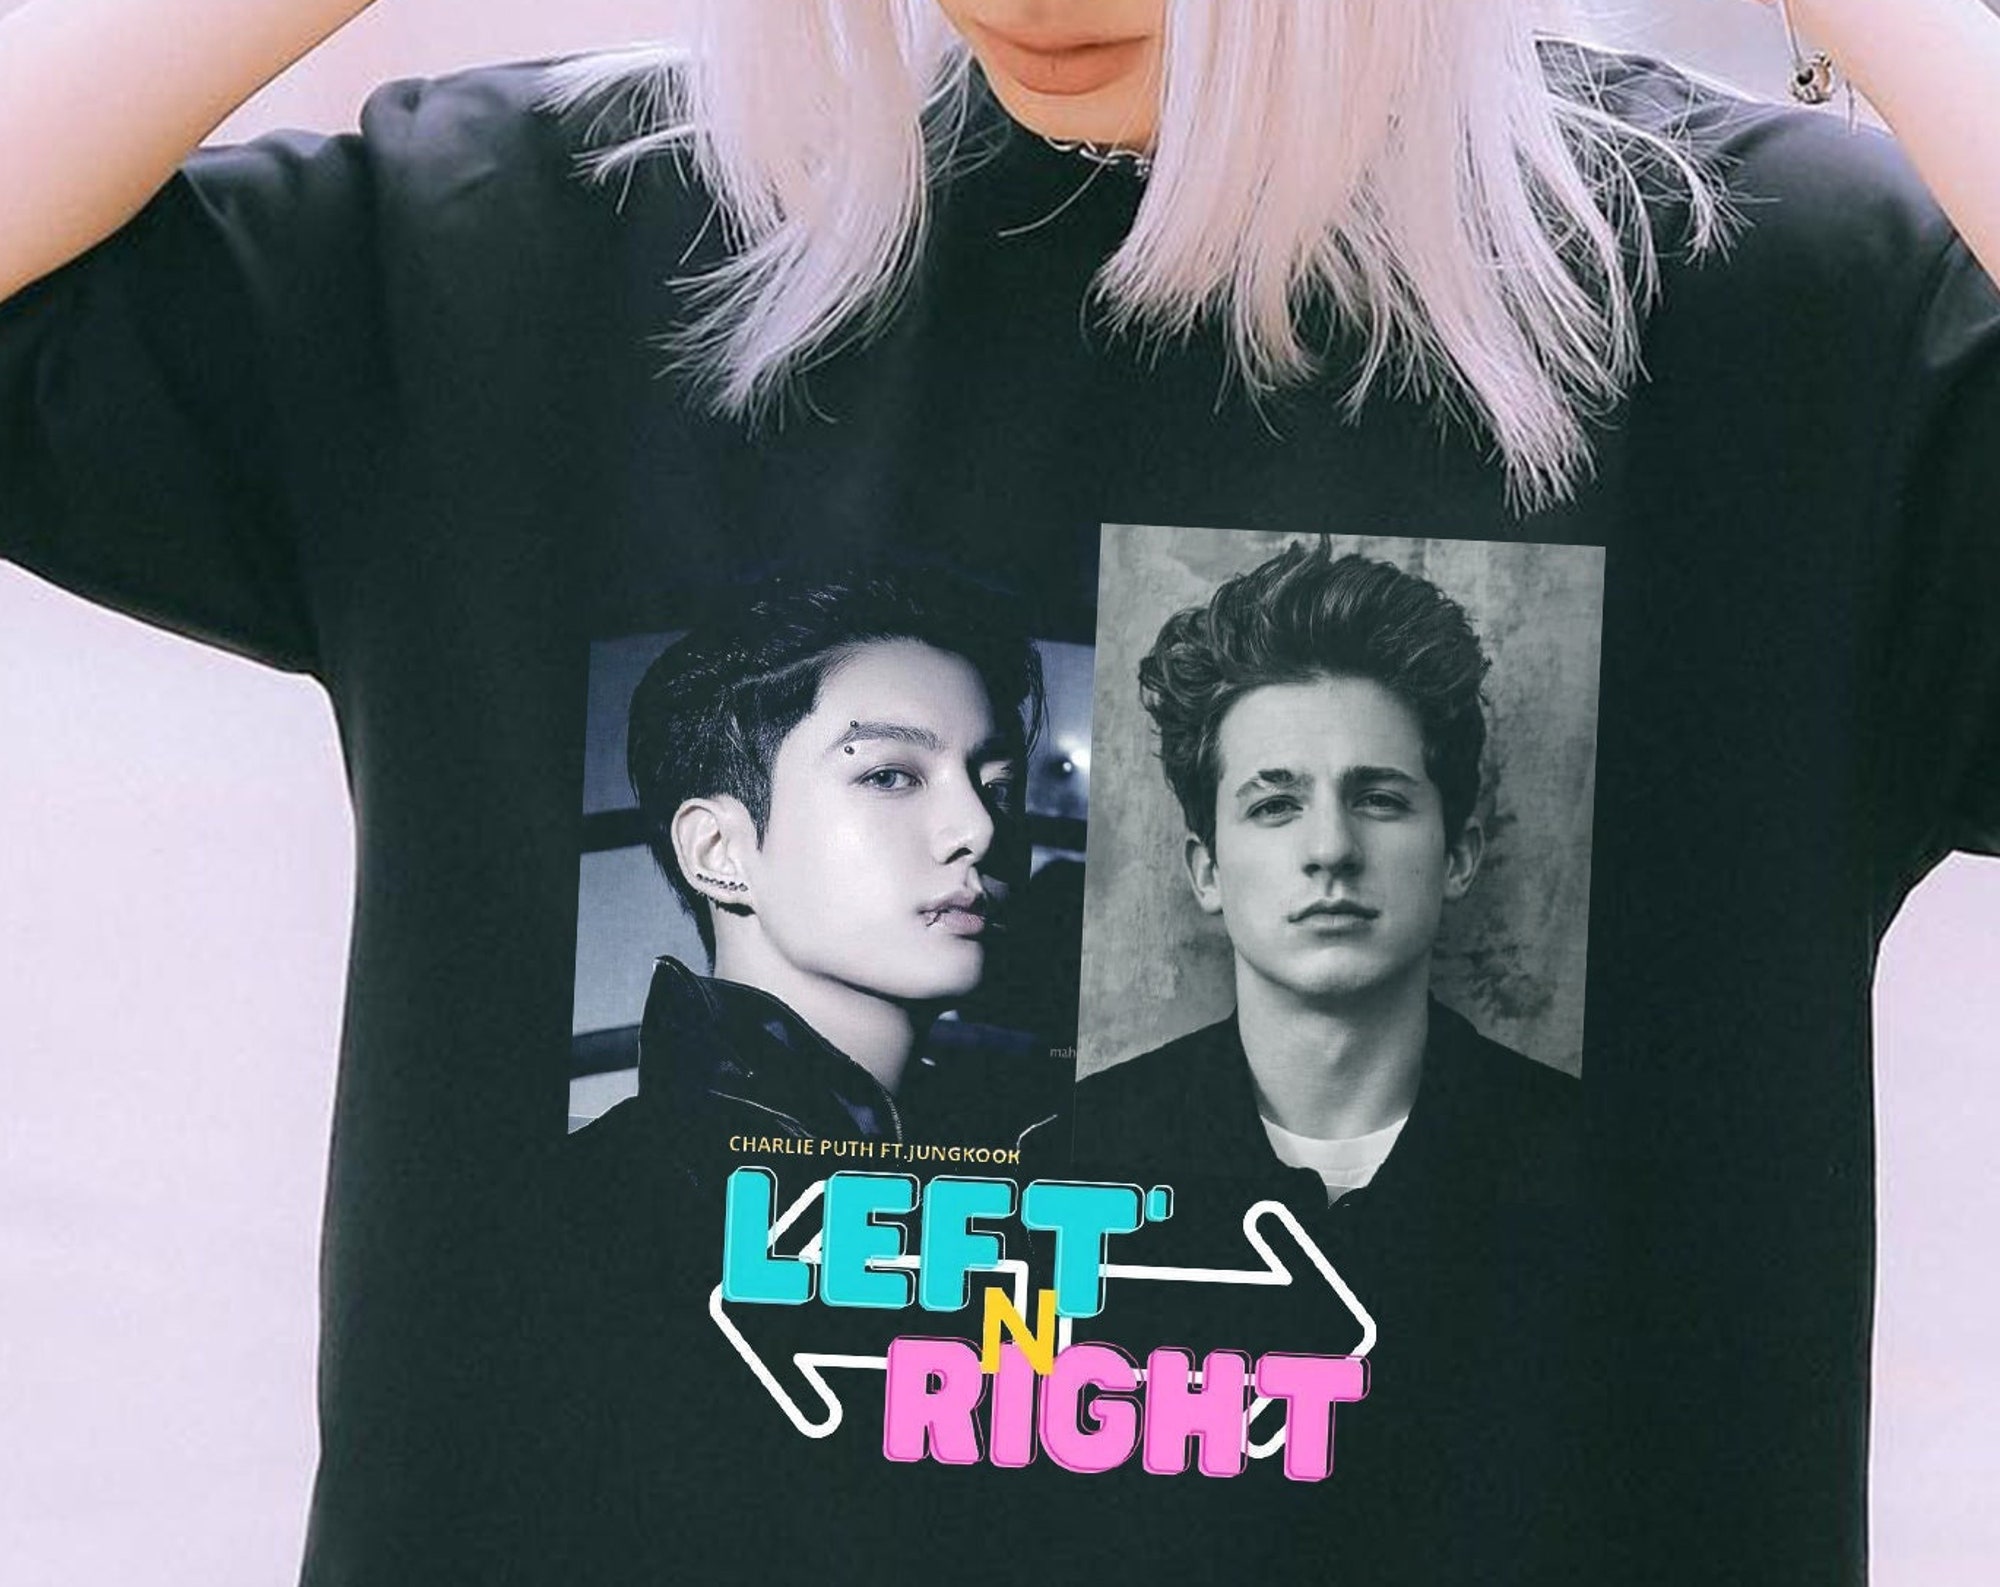 Discover Left and Right with Jungkook Tshirt, Charlie Puth Collab with Jung Kook of BTS Tshirt